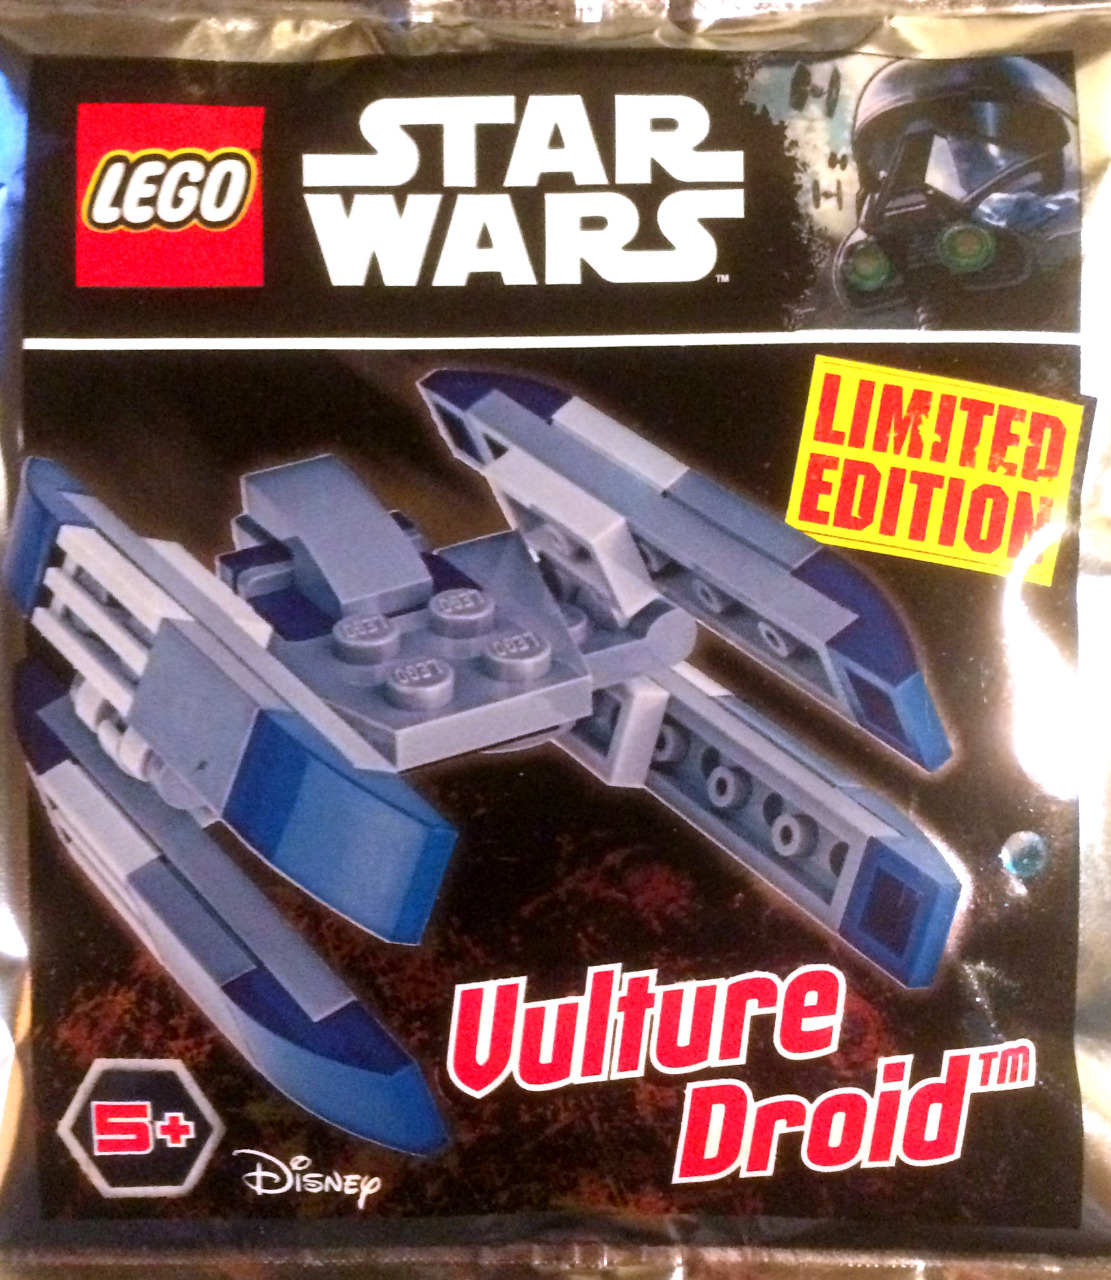 Lego 30055 Star Wars-Vulture Droid 42 PIECES Polybag Neuf Scellé 